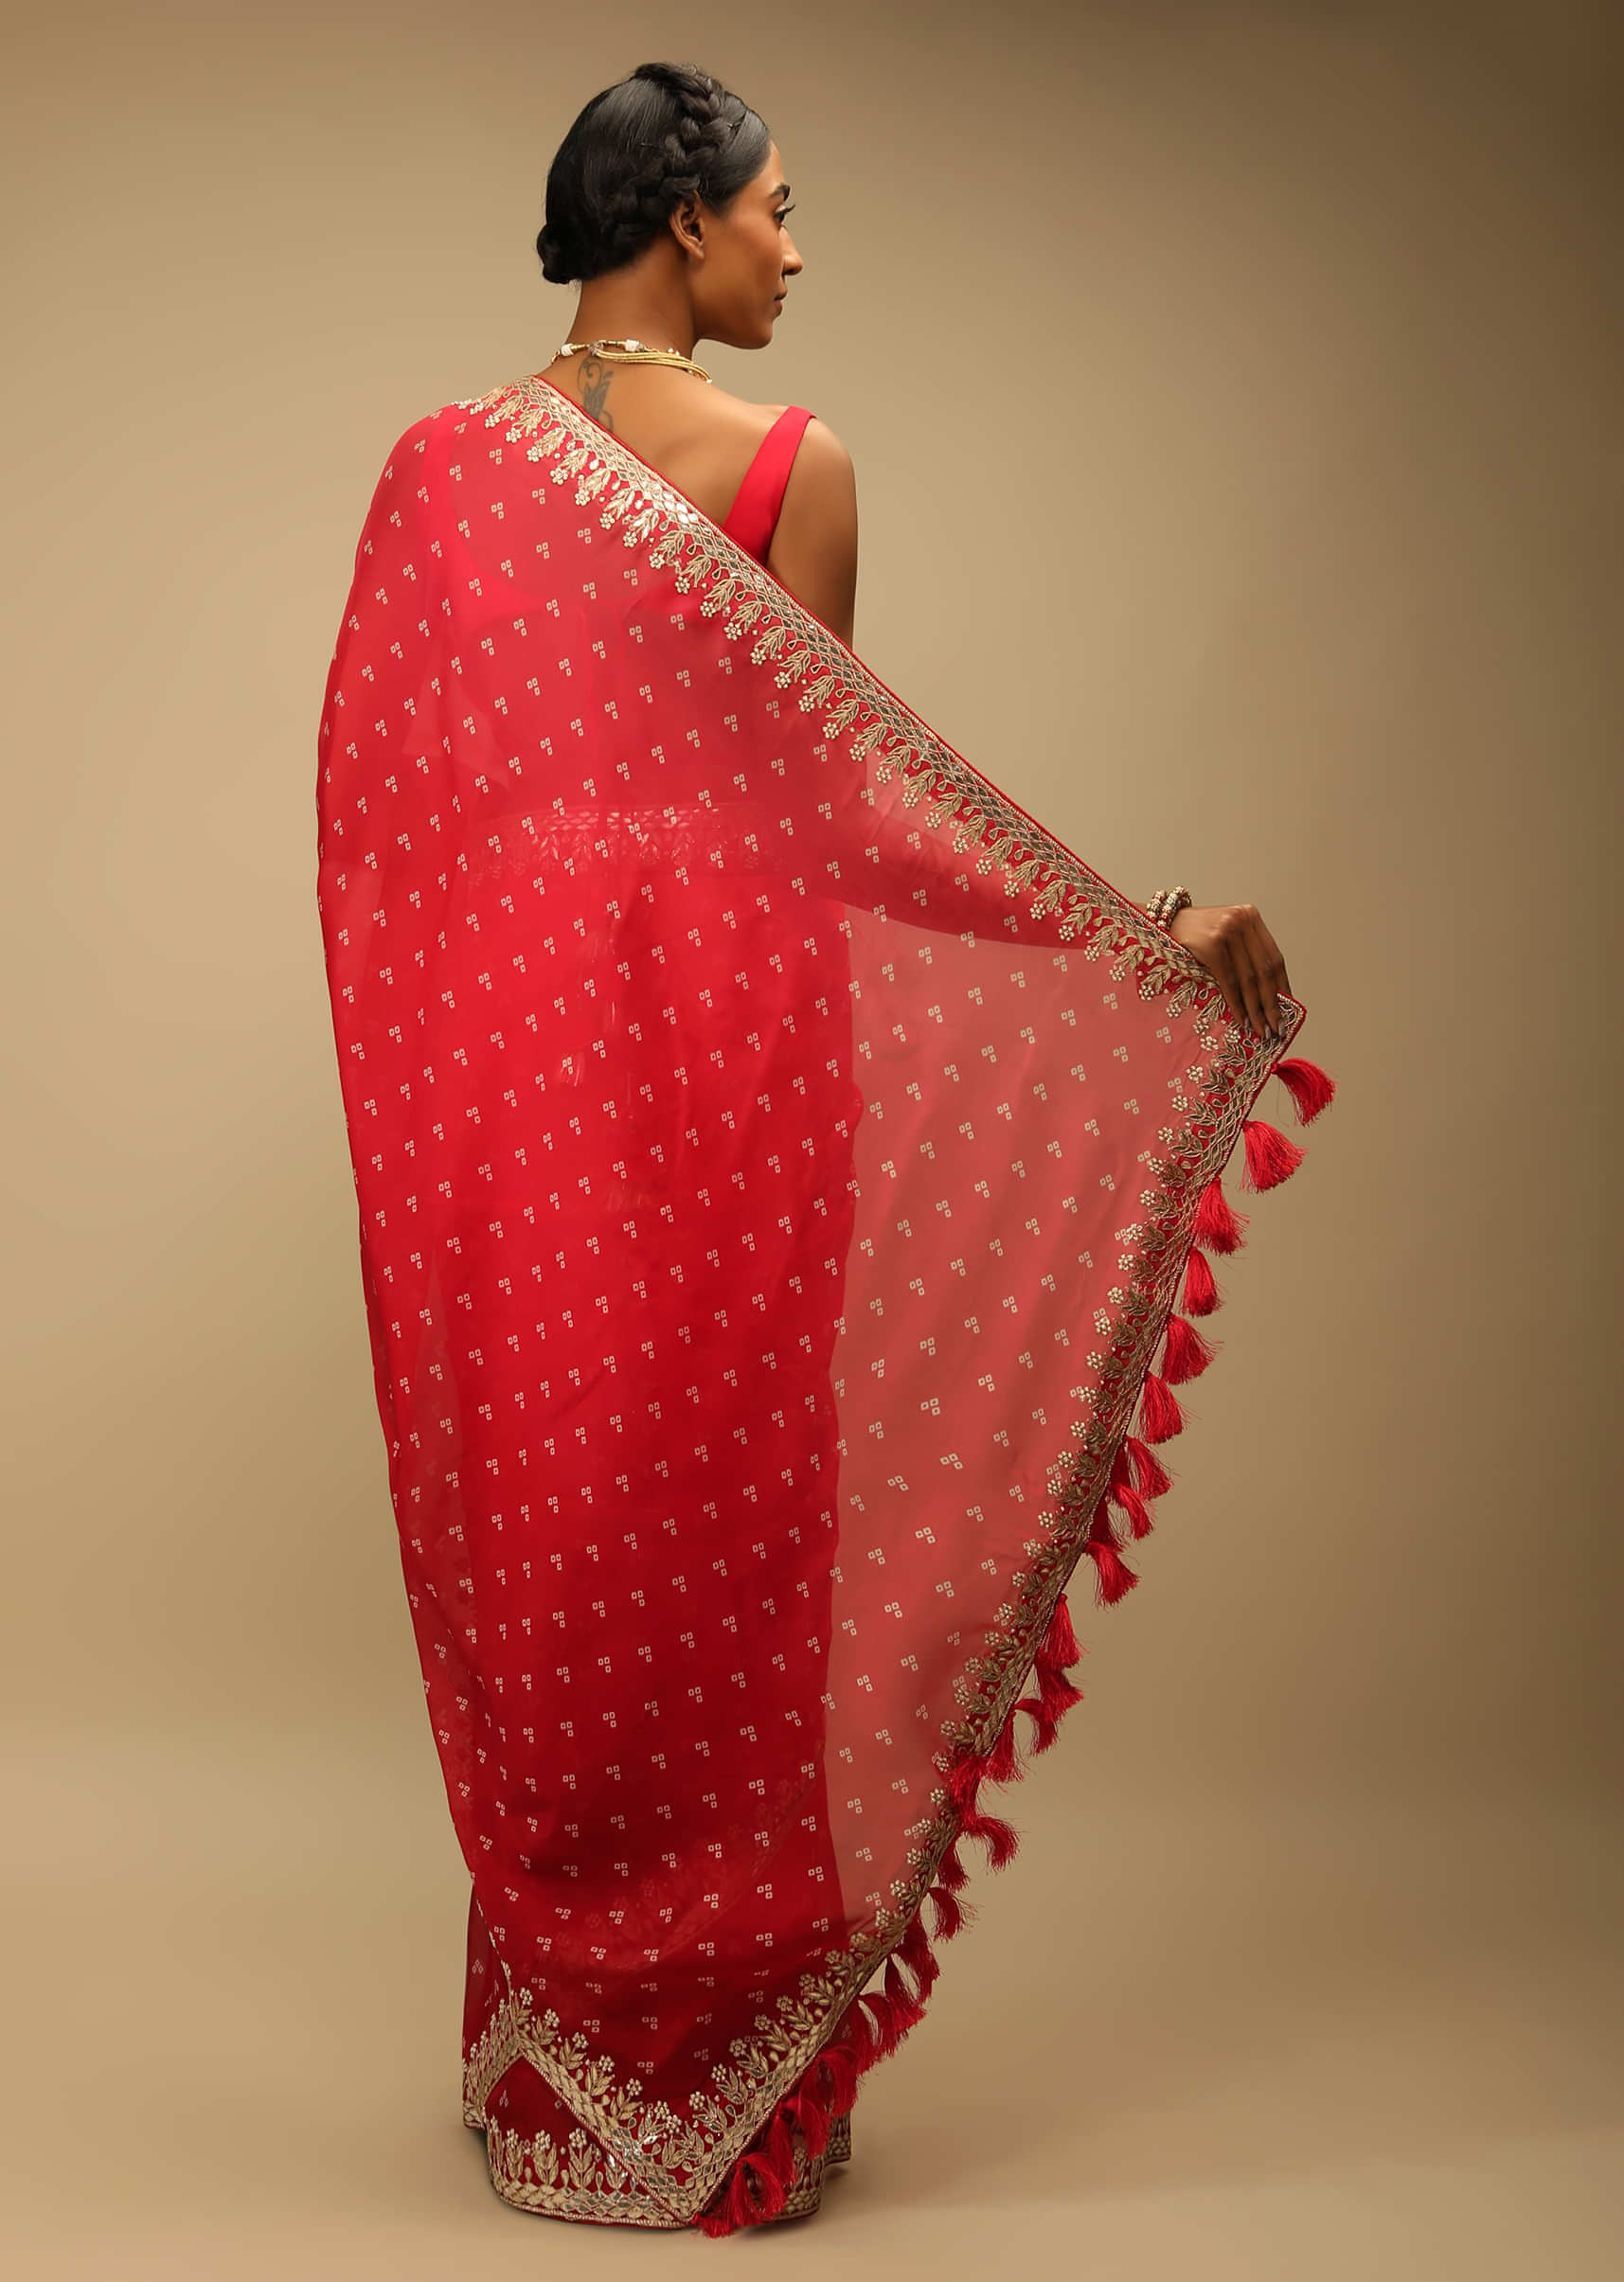 Red Ombre Saree In Organza With Bandhani Printed Geometric Buttis And Gotta Border 